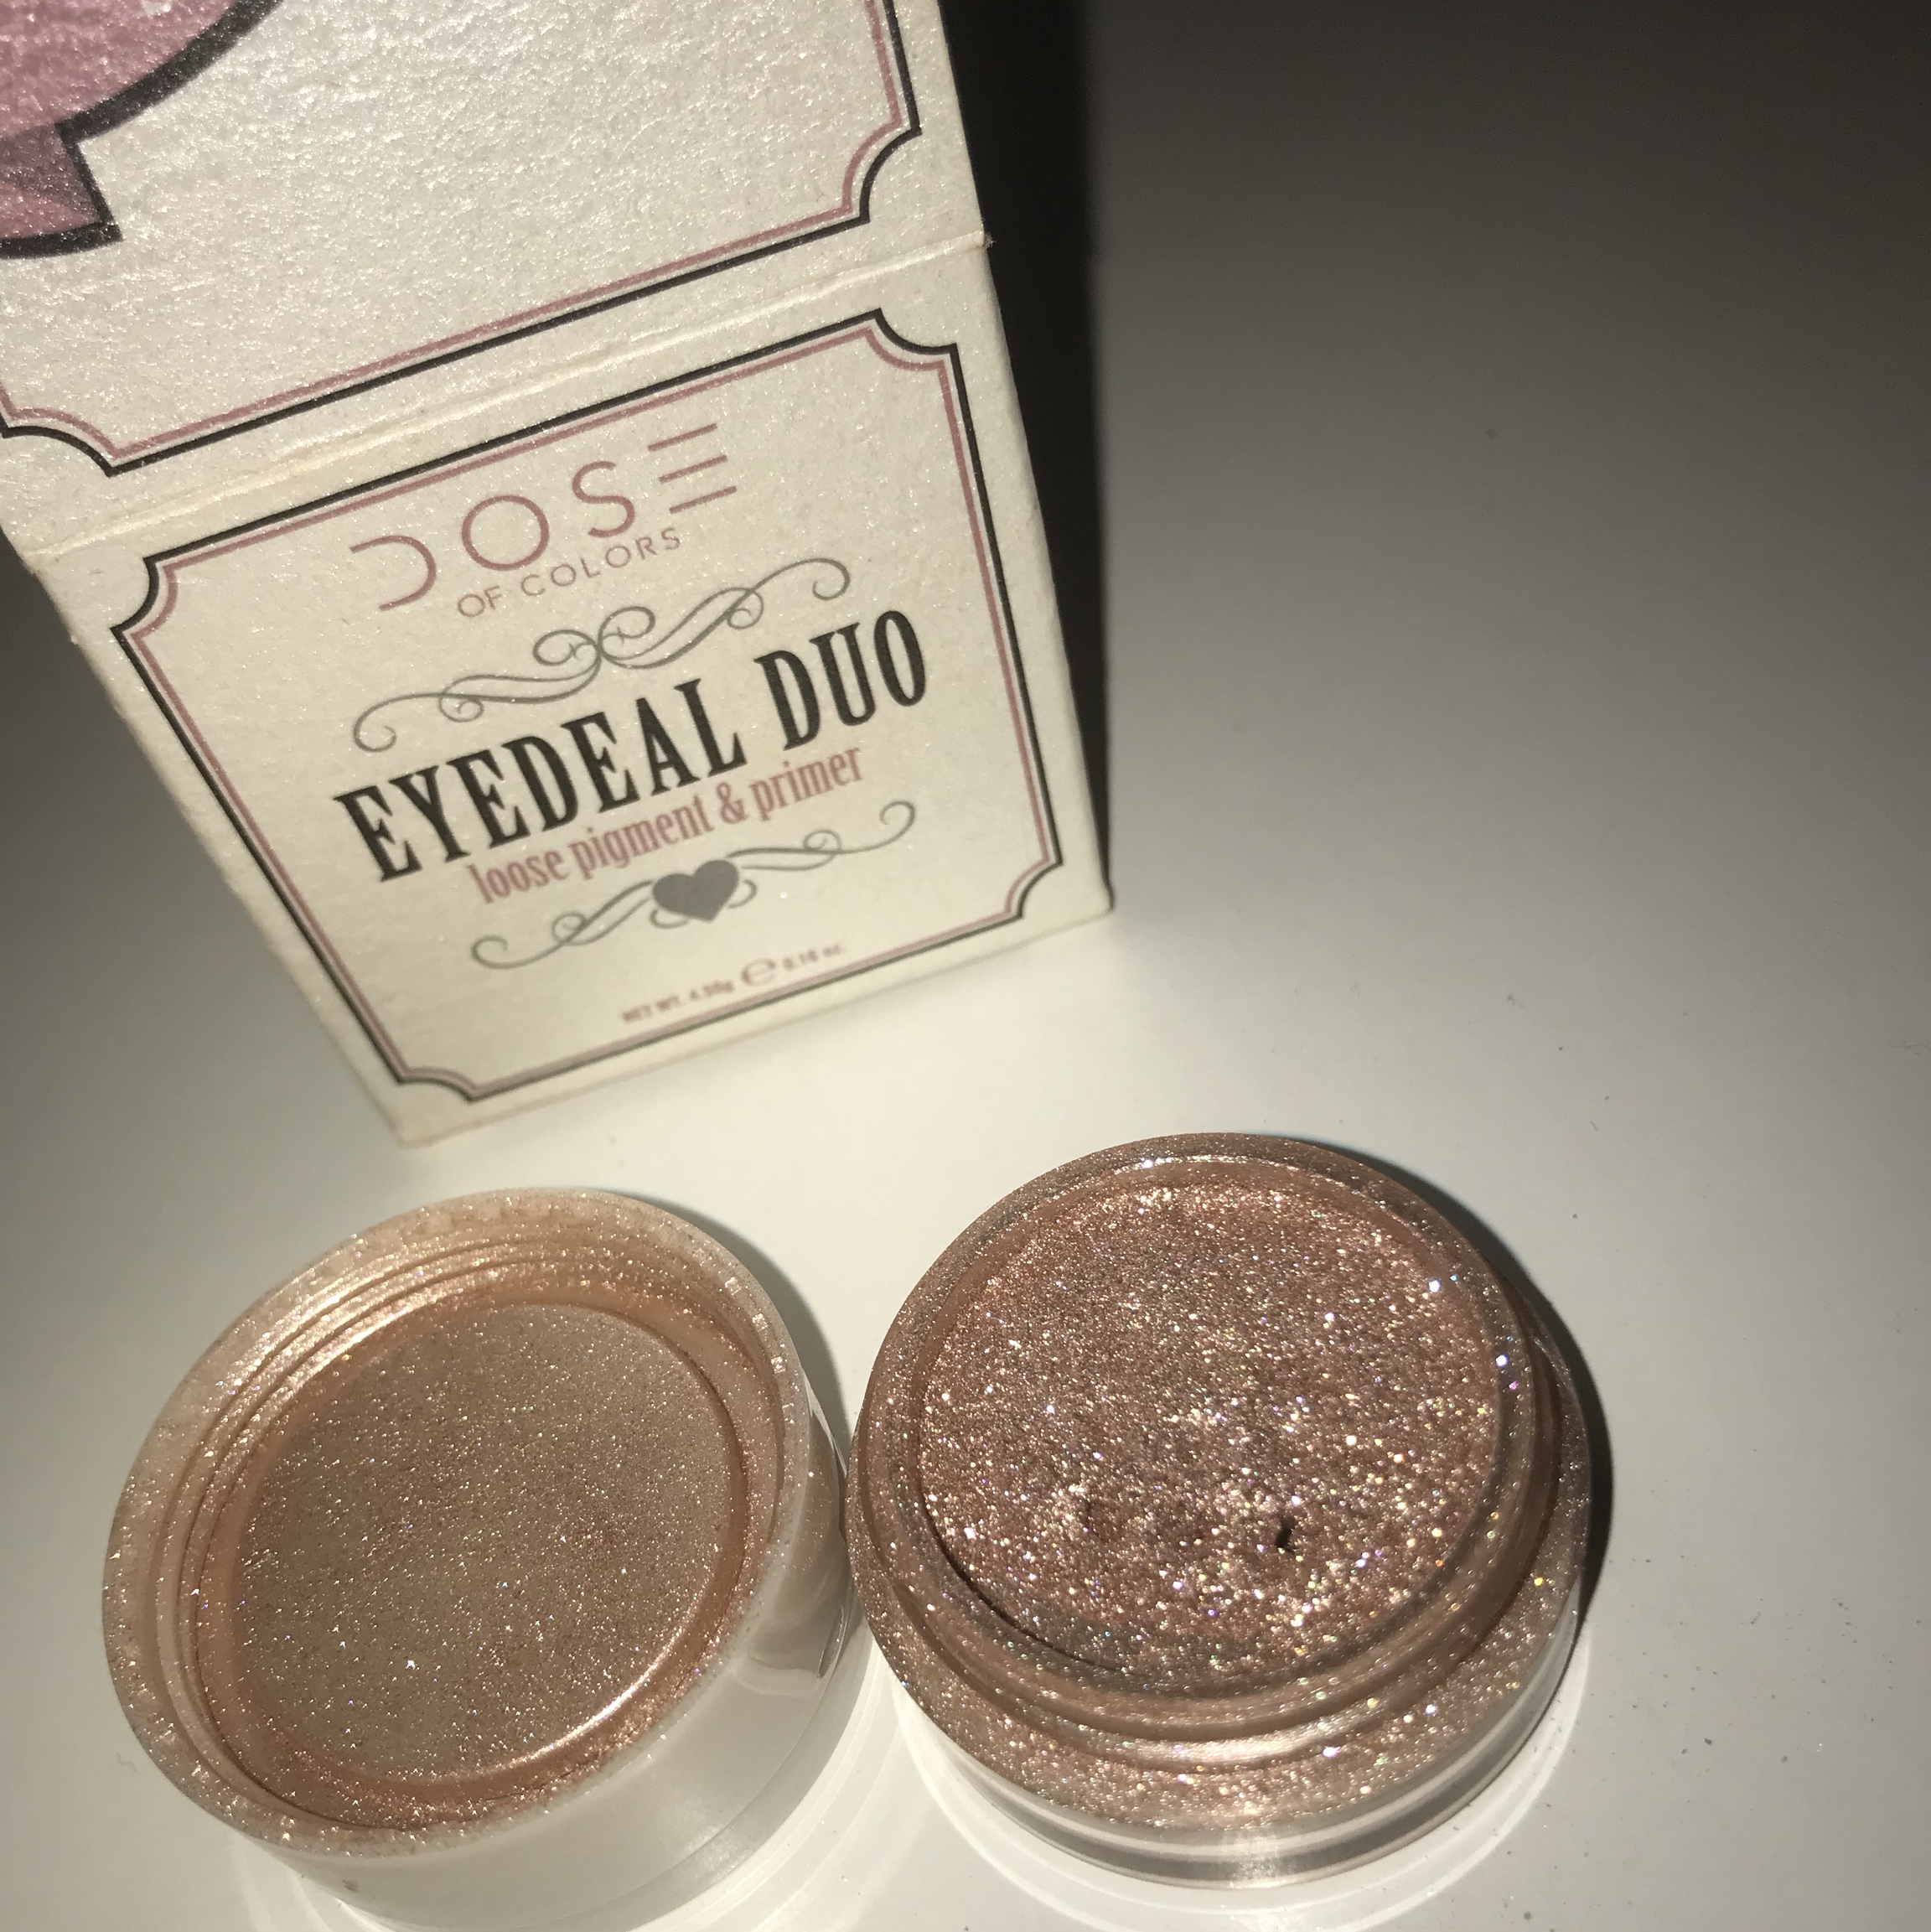 Dose Of Colors Eyedeal Duo Loose Pigment & Primer Sunset